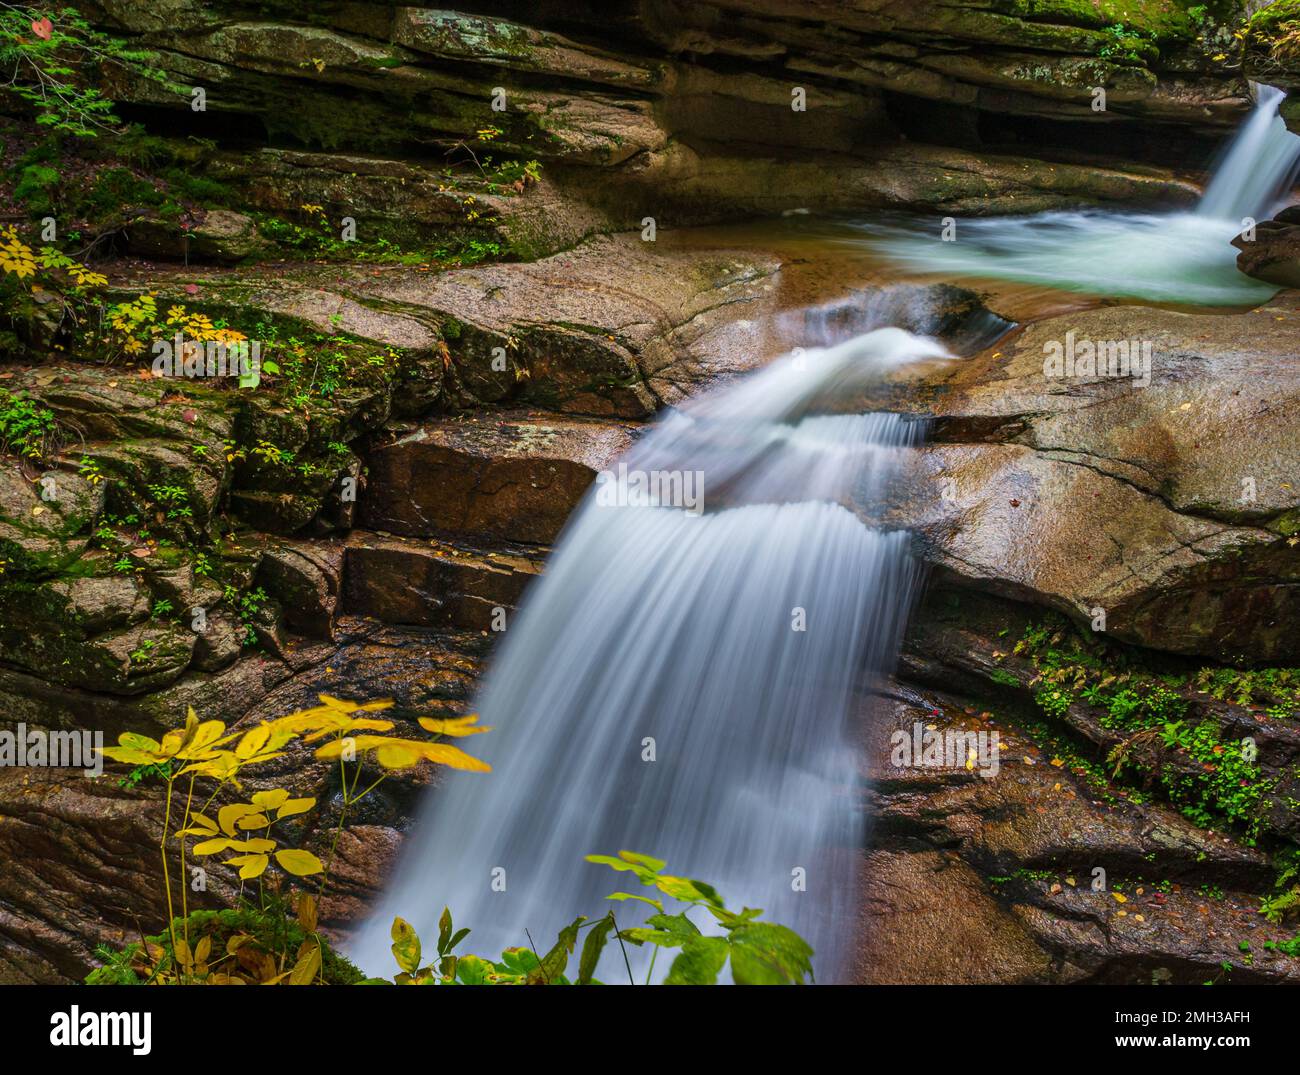 Sabbaday Falls is a beautiful waterfall located in a forest in the White Mountains of New Hampshire. Stock Photo